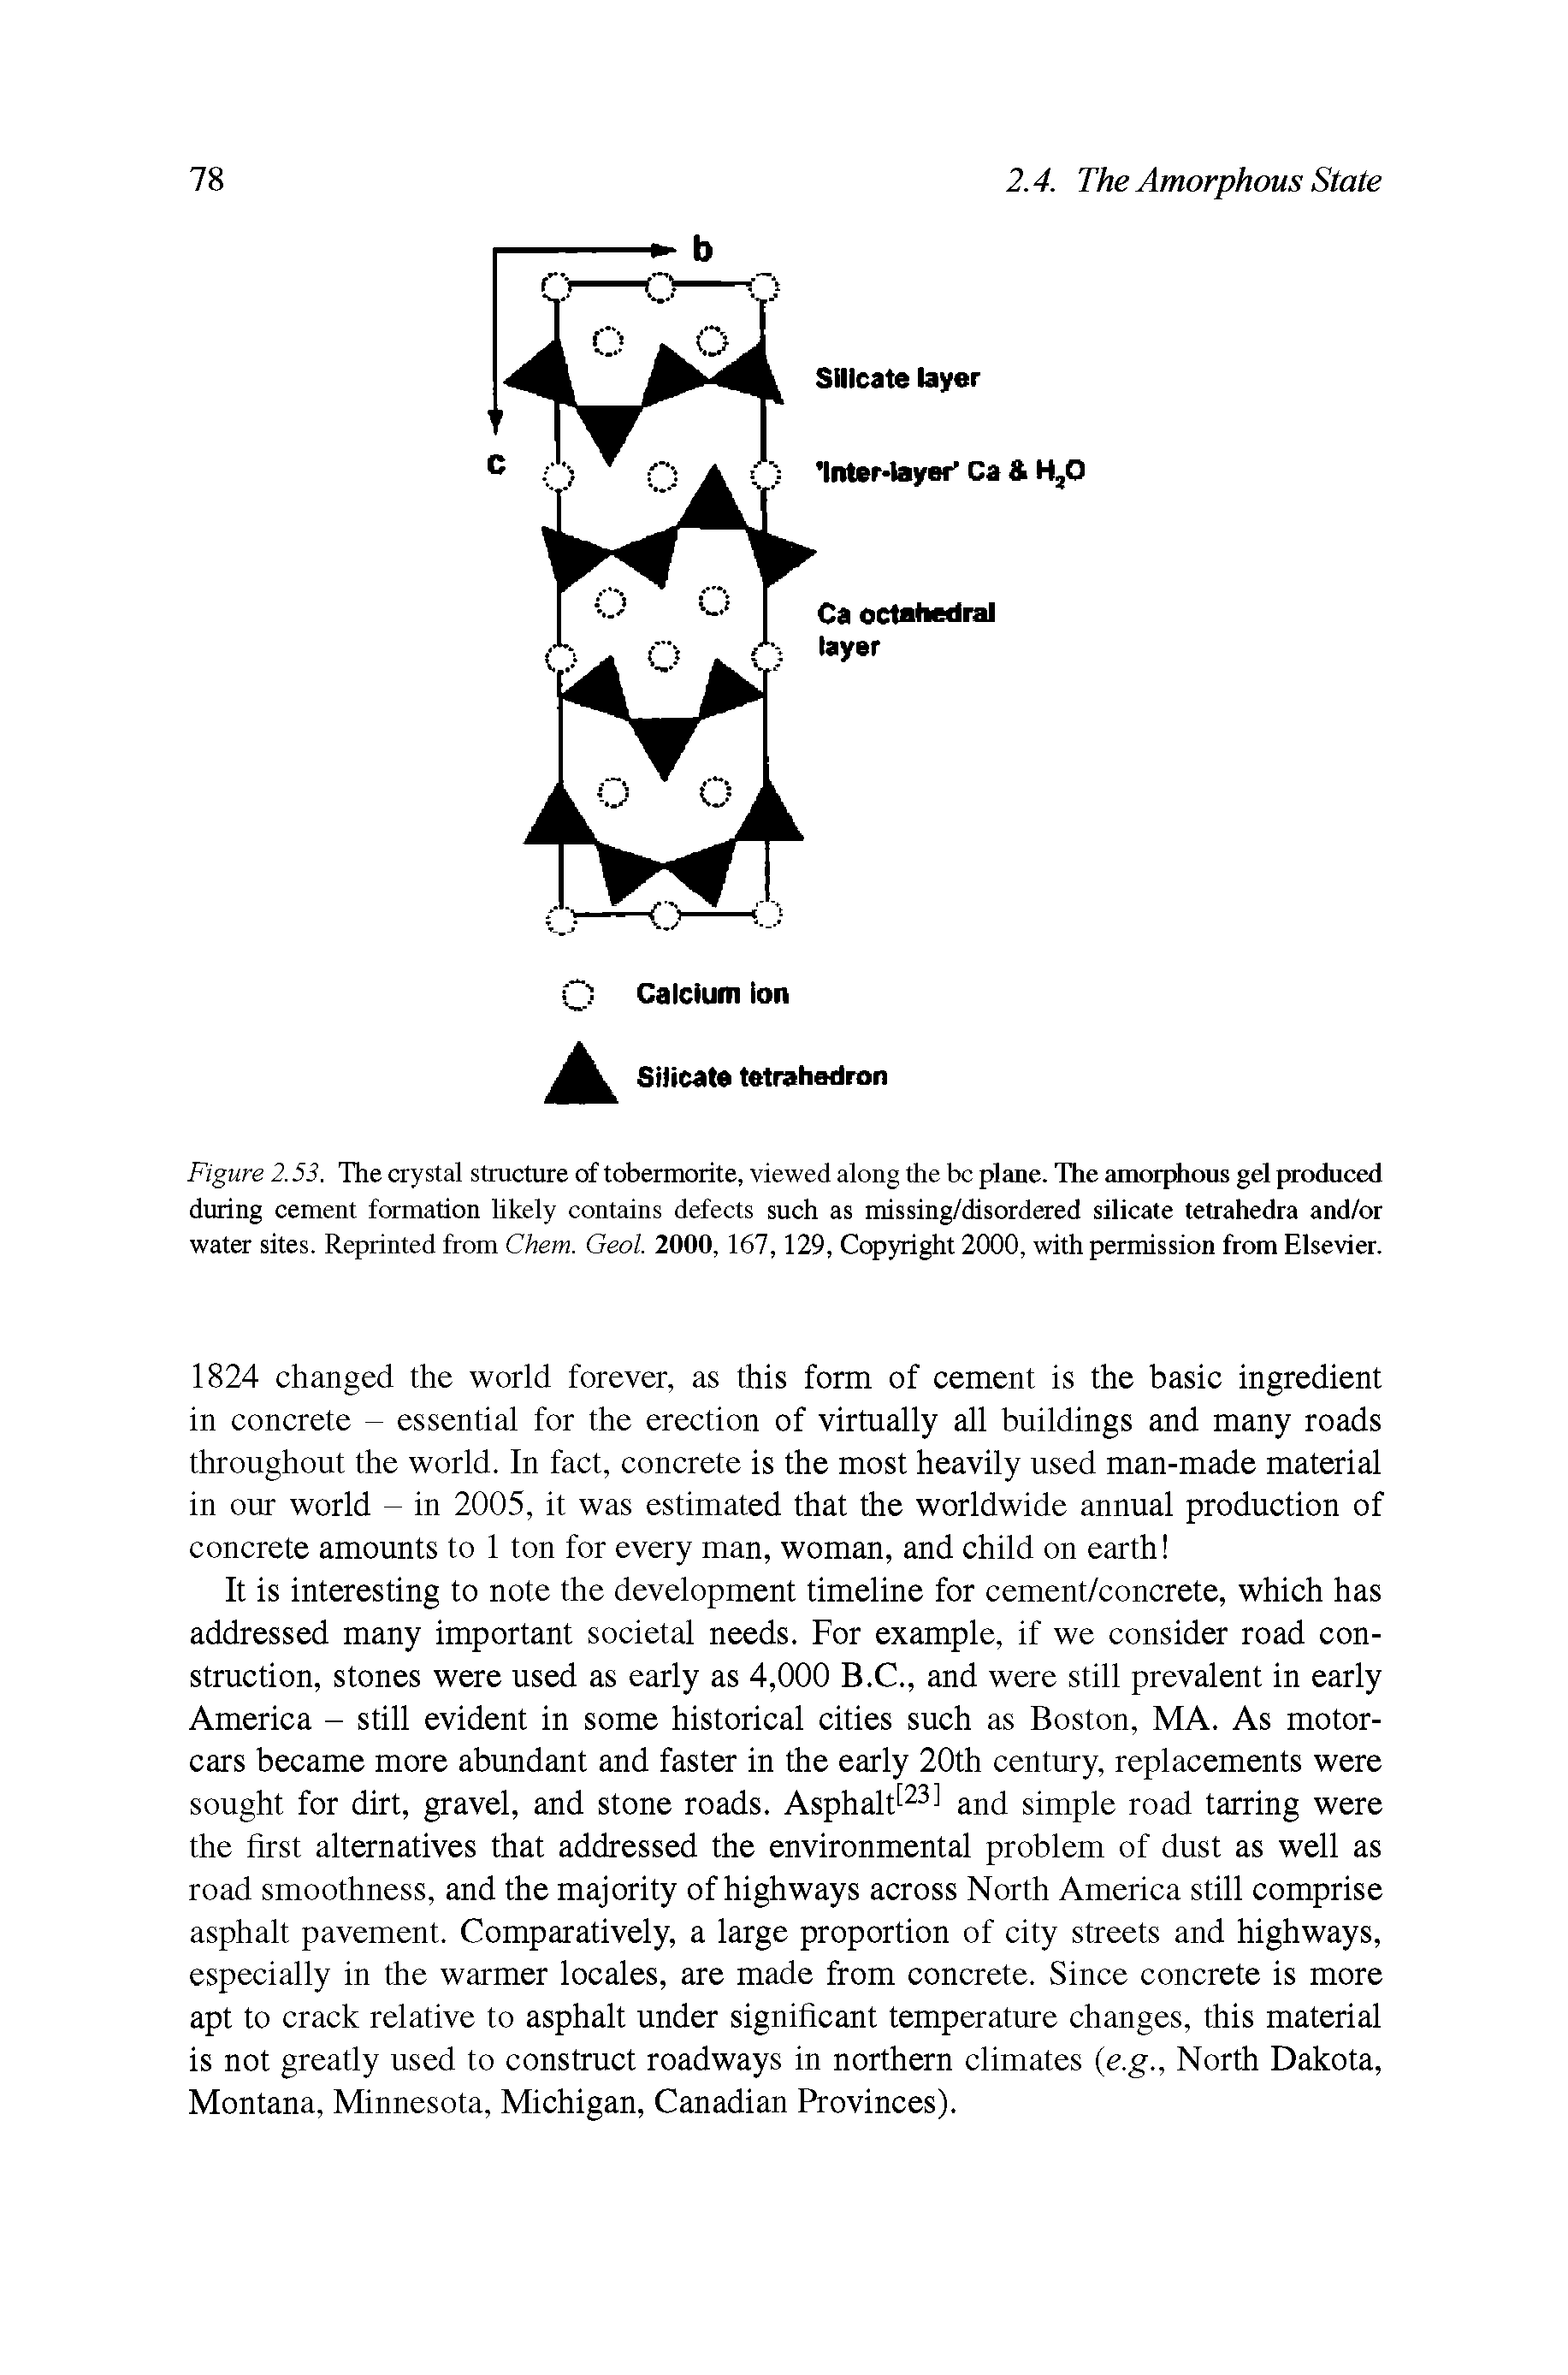 Figure 2.53. The crystal structure of tobermorite, viewed along the be plane. The amorphous gel produced during cement formation likely contains defects such as missing/disordered silicate tetrahedra and/or water sites. Reprinted from Chem. Geol. 2000, 167,129, Copyright 2000, with permission from Elsevier.